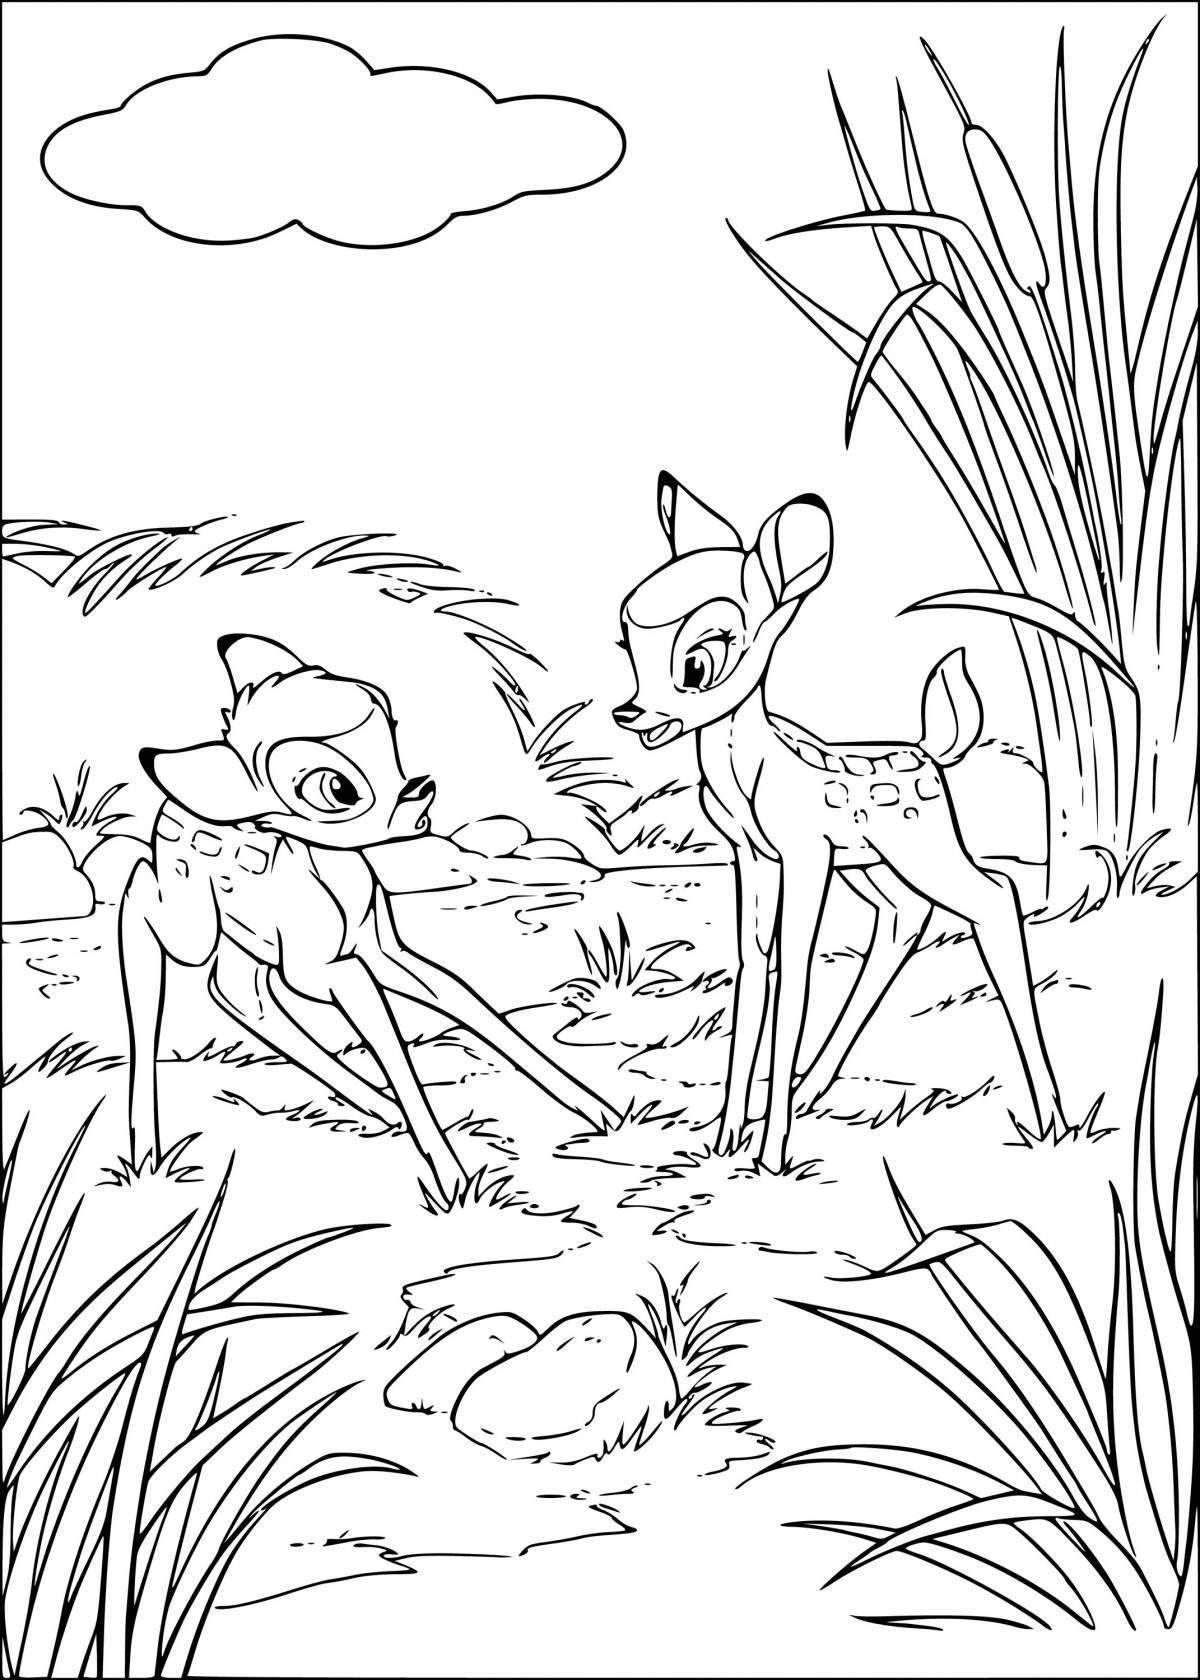 Exciting coloring bambi 2